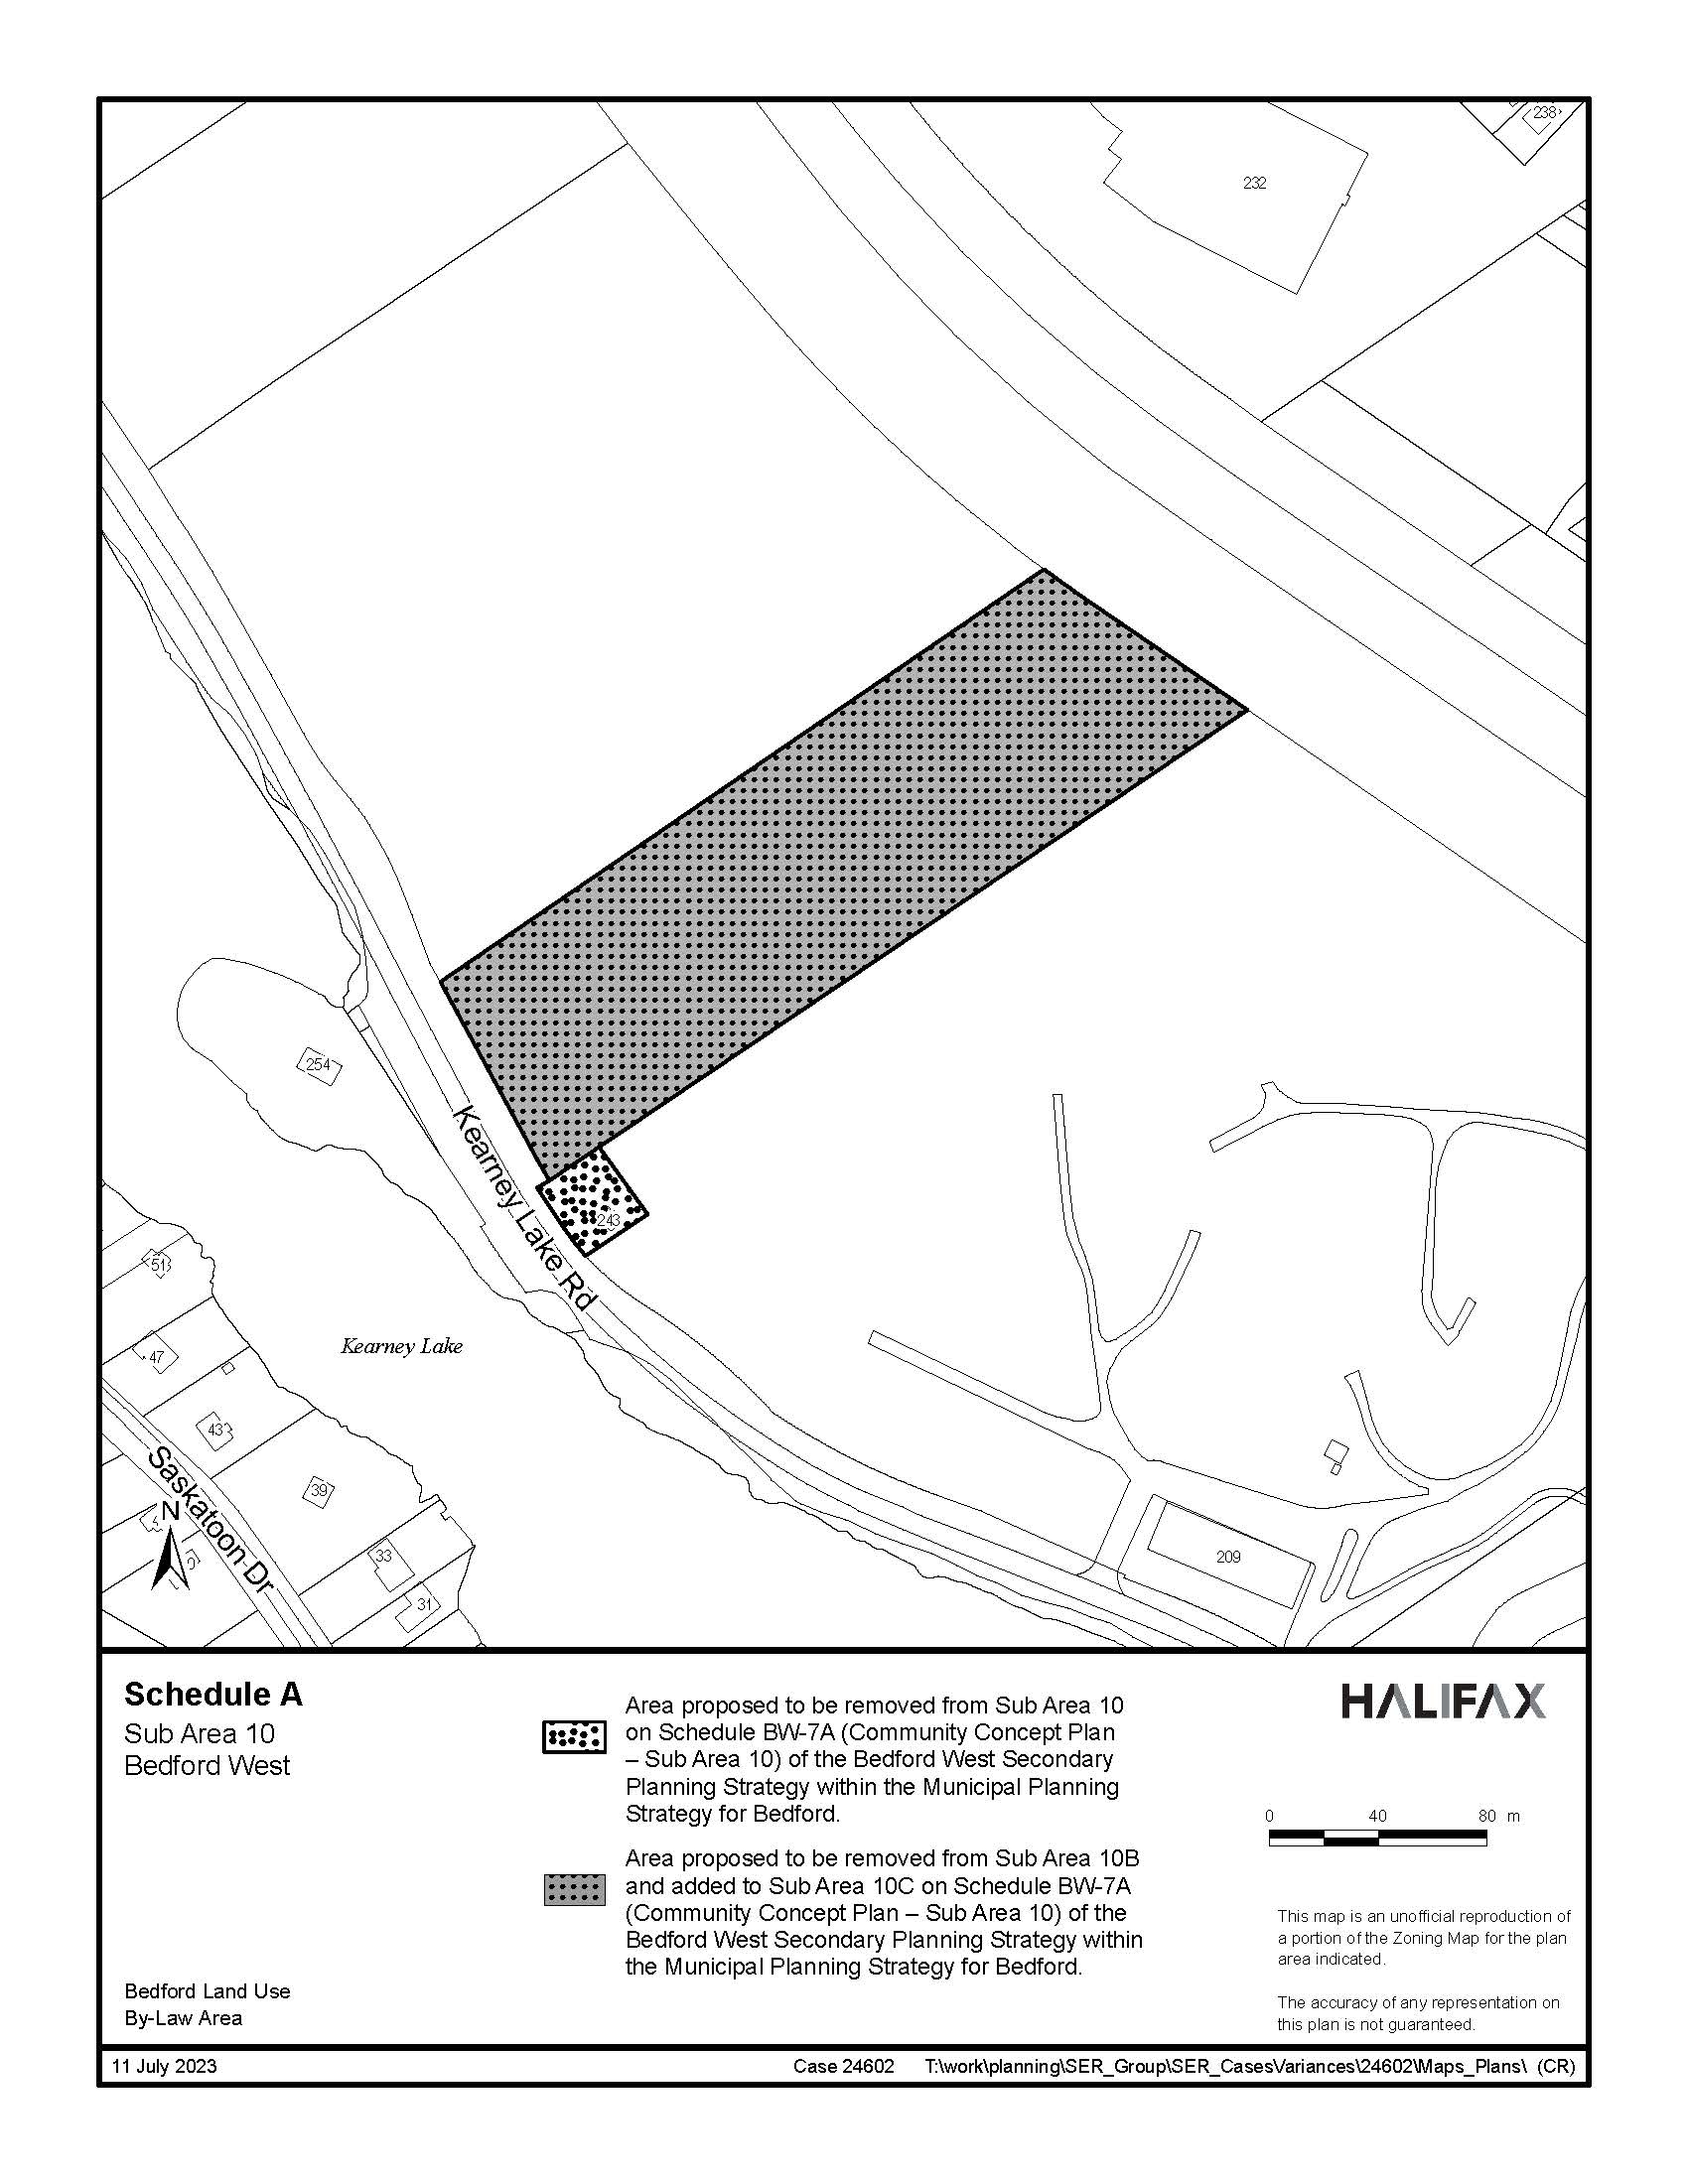 Graphic showing map of changes to Sub Area 10 Bedford West in the Bedford Land Use By-law